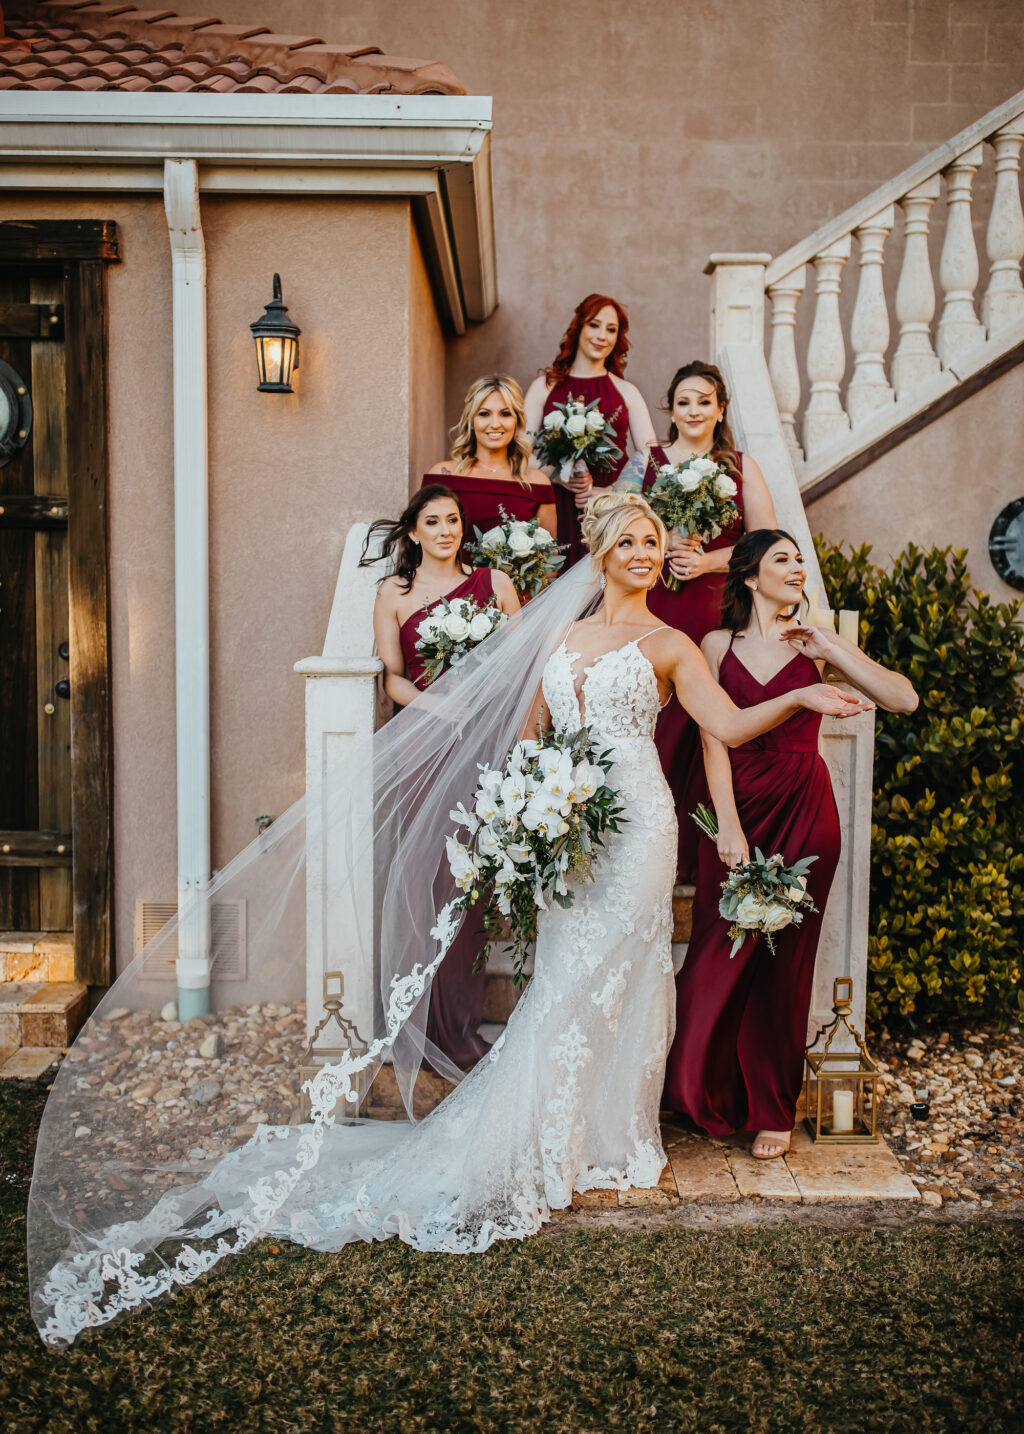 Imago Dei by Milan | Tampa Bay Hair and Makeup Artist